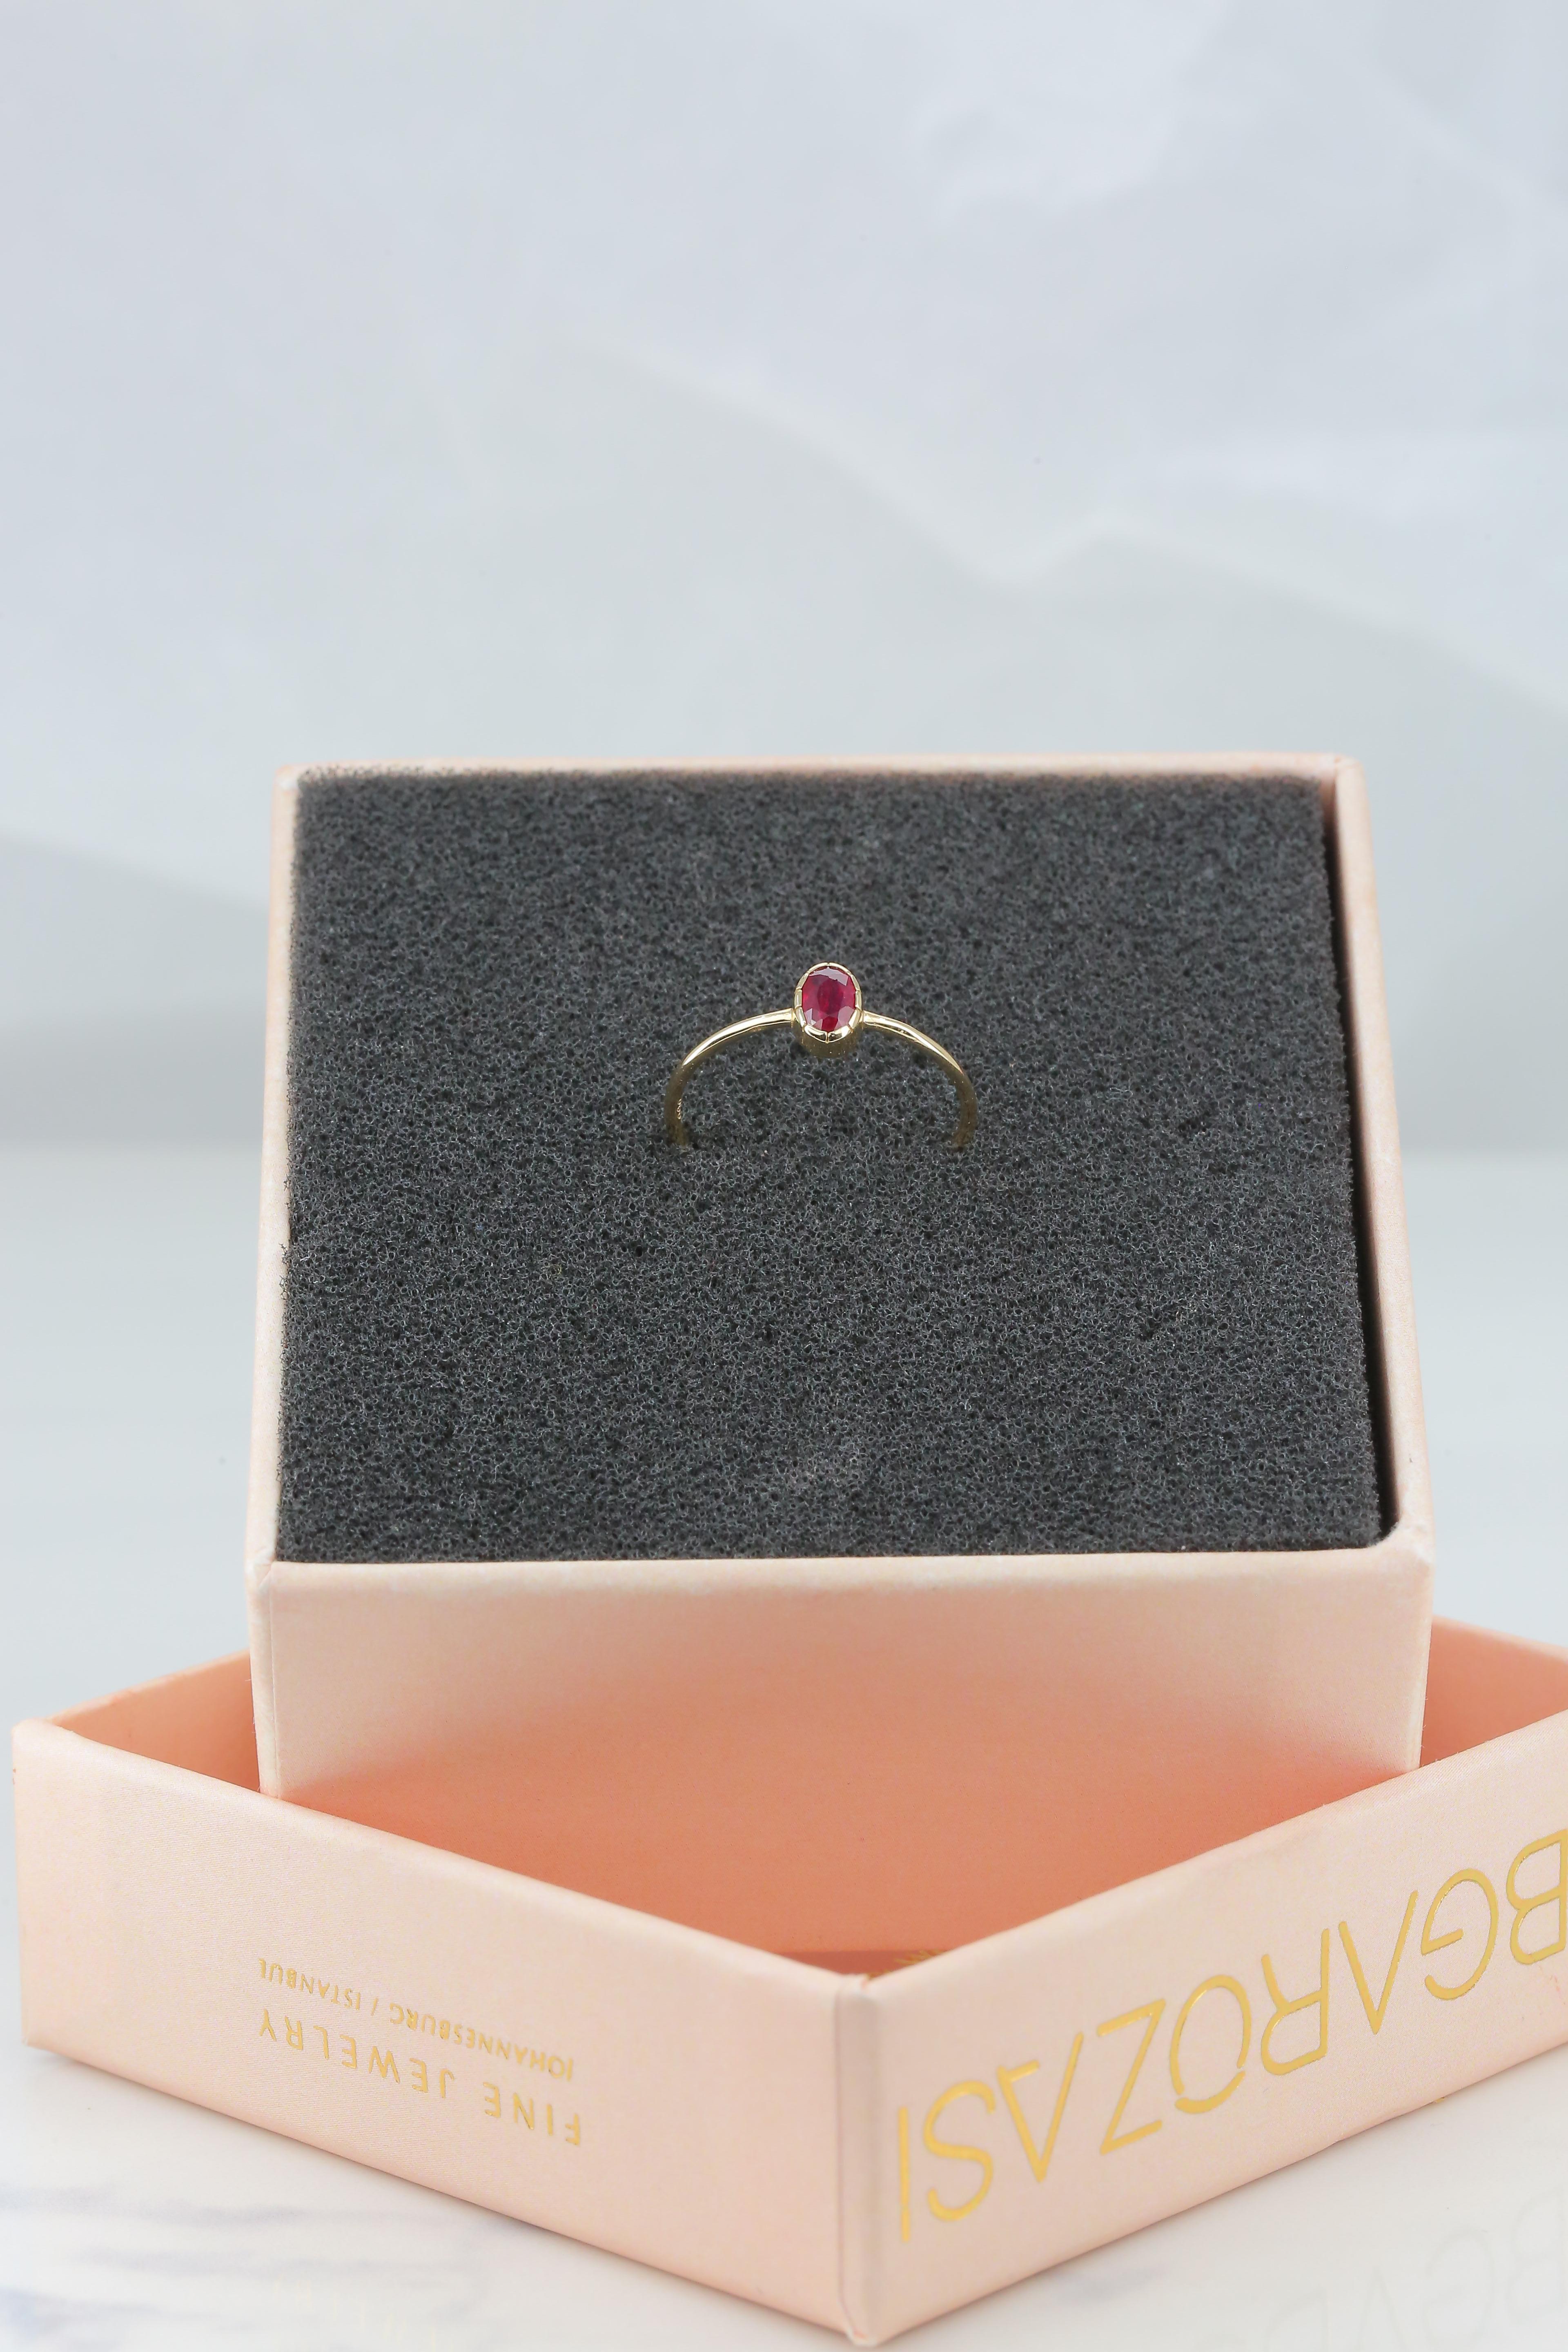 En vente :  0.32 Ct Oval Cut Ruby 14K Gold Birthstone Ring, Casual Ring, Combinable Ring 9